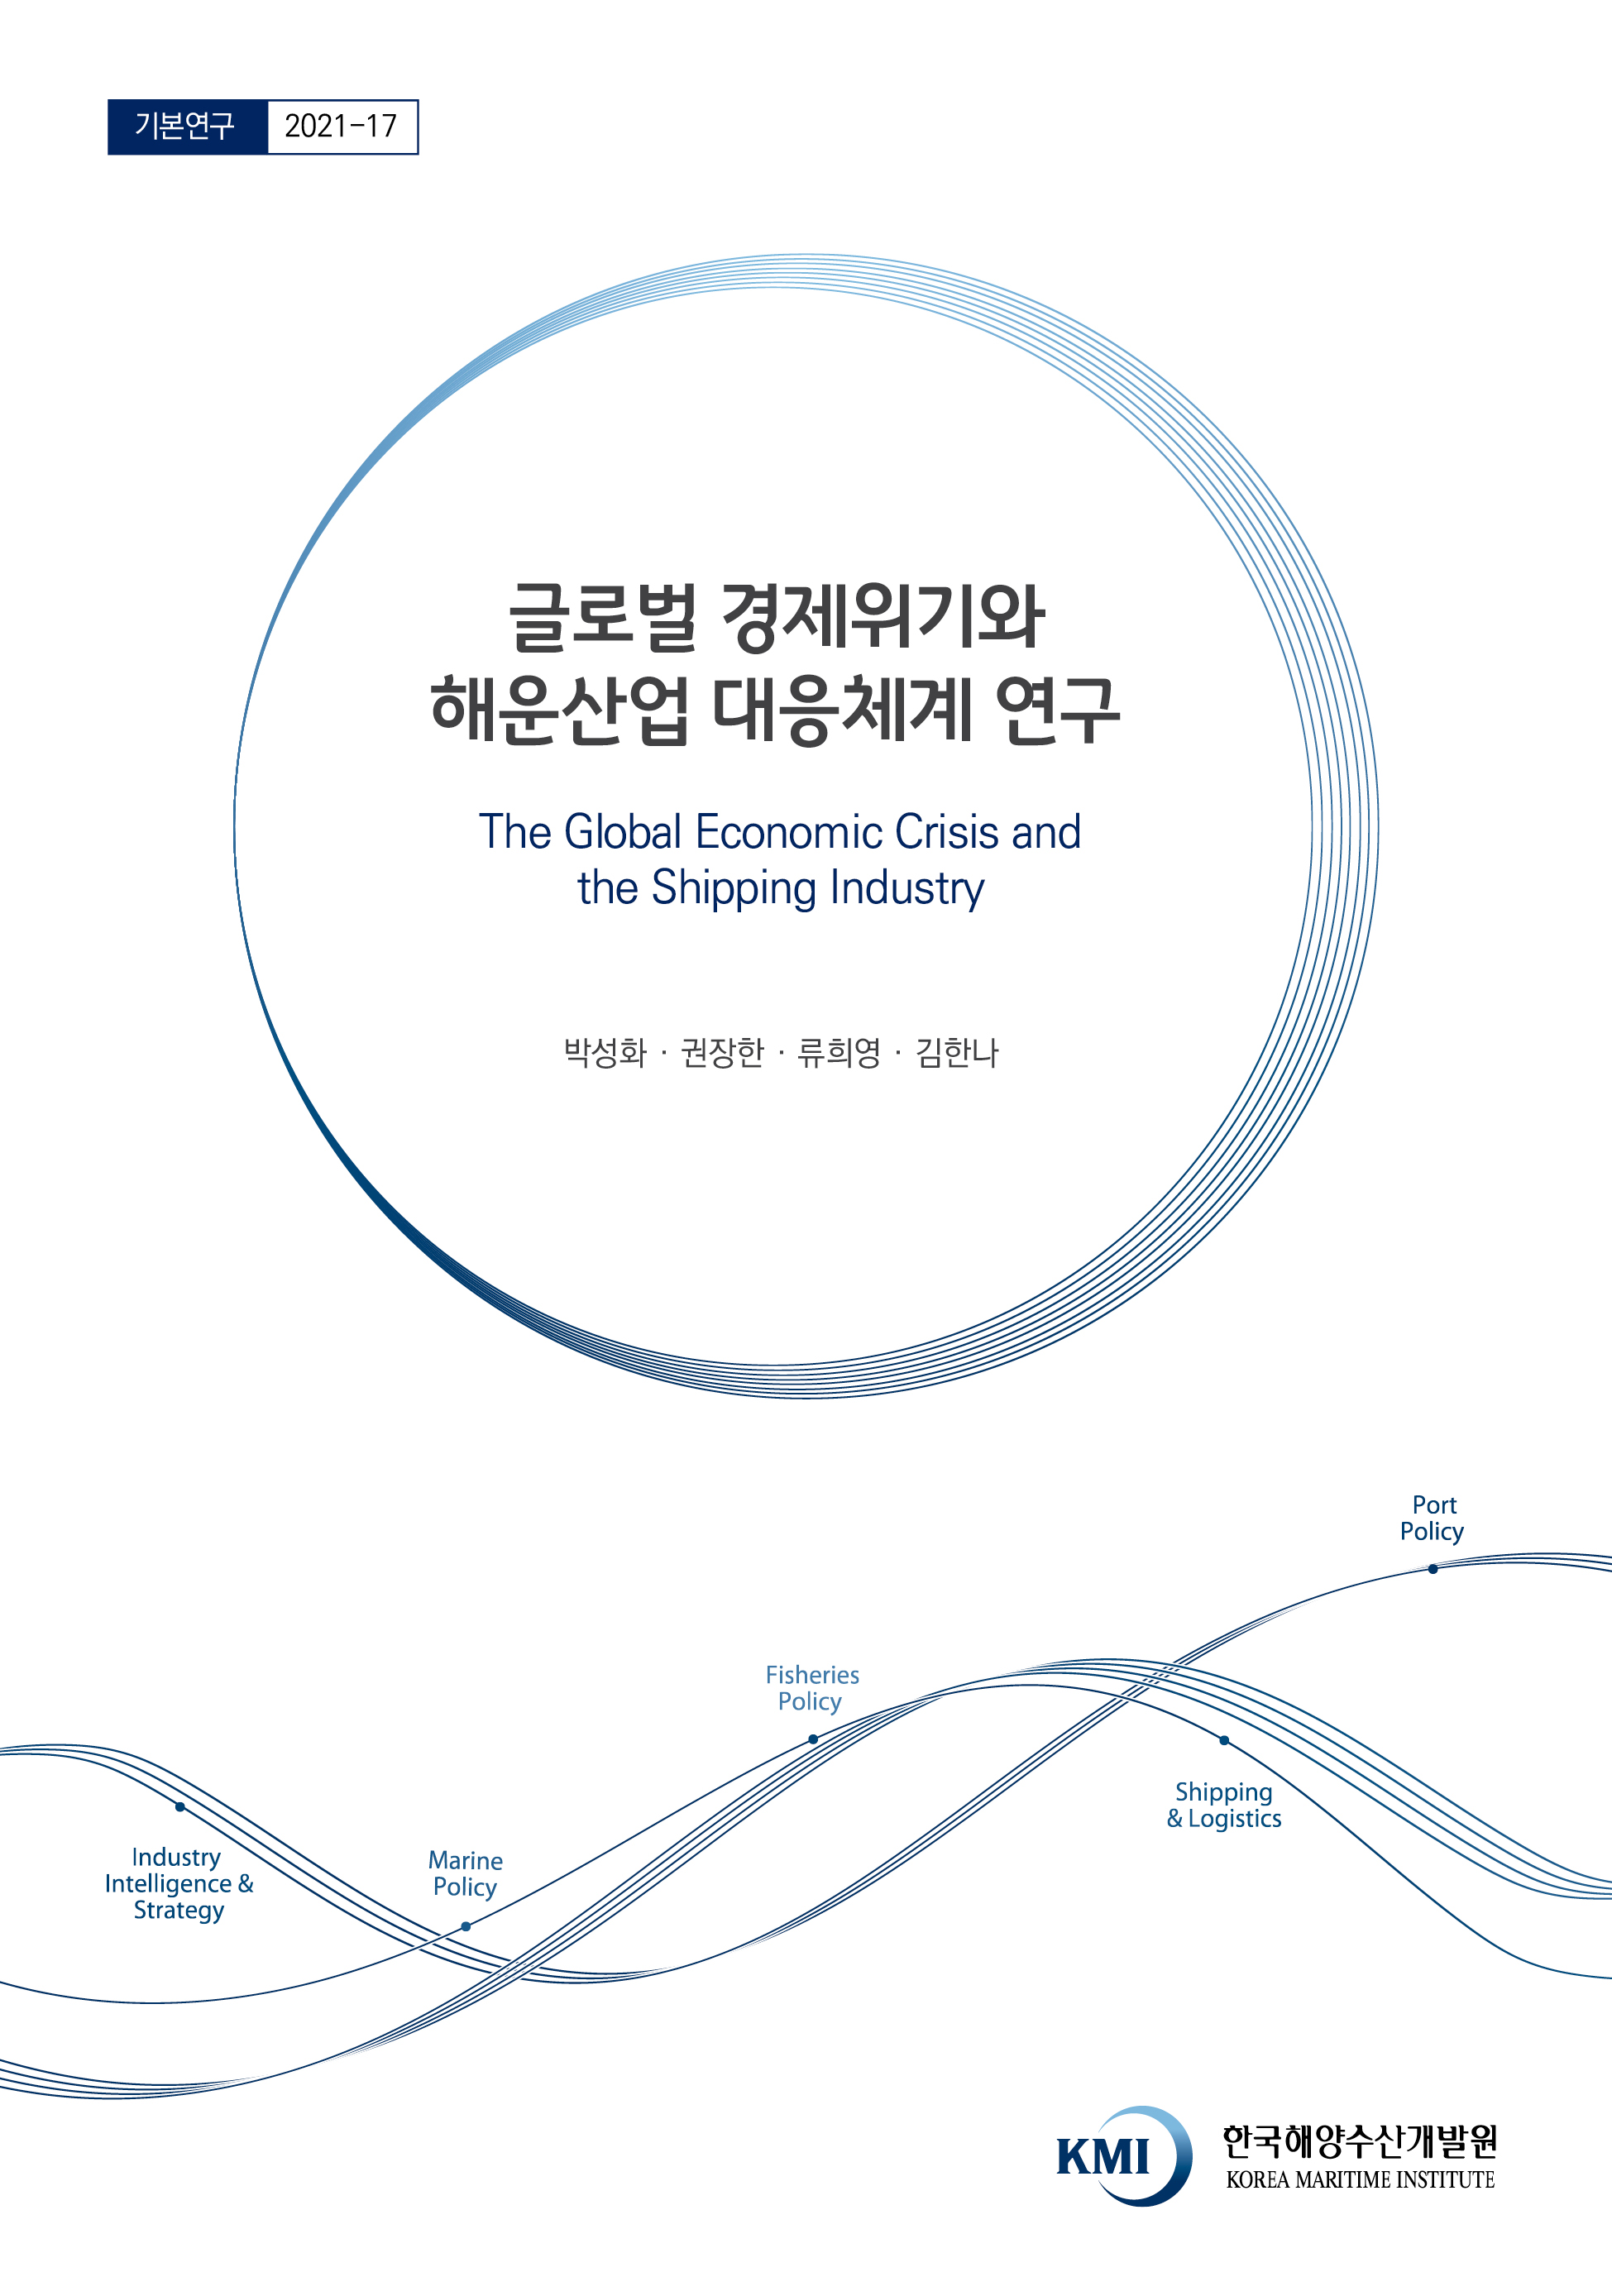 The Global Economic Crisis and the Shipping Industry